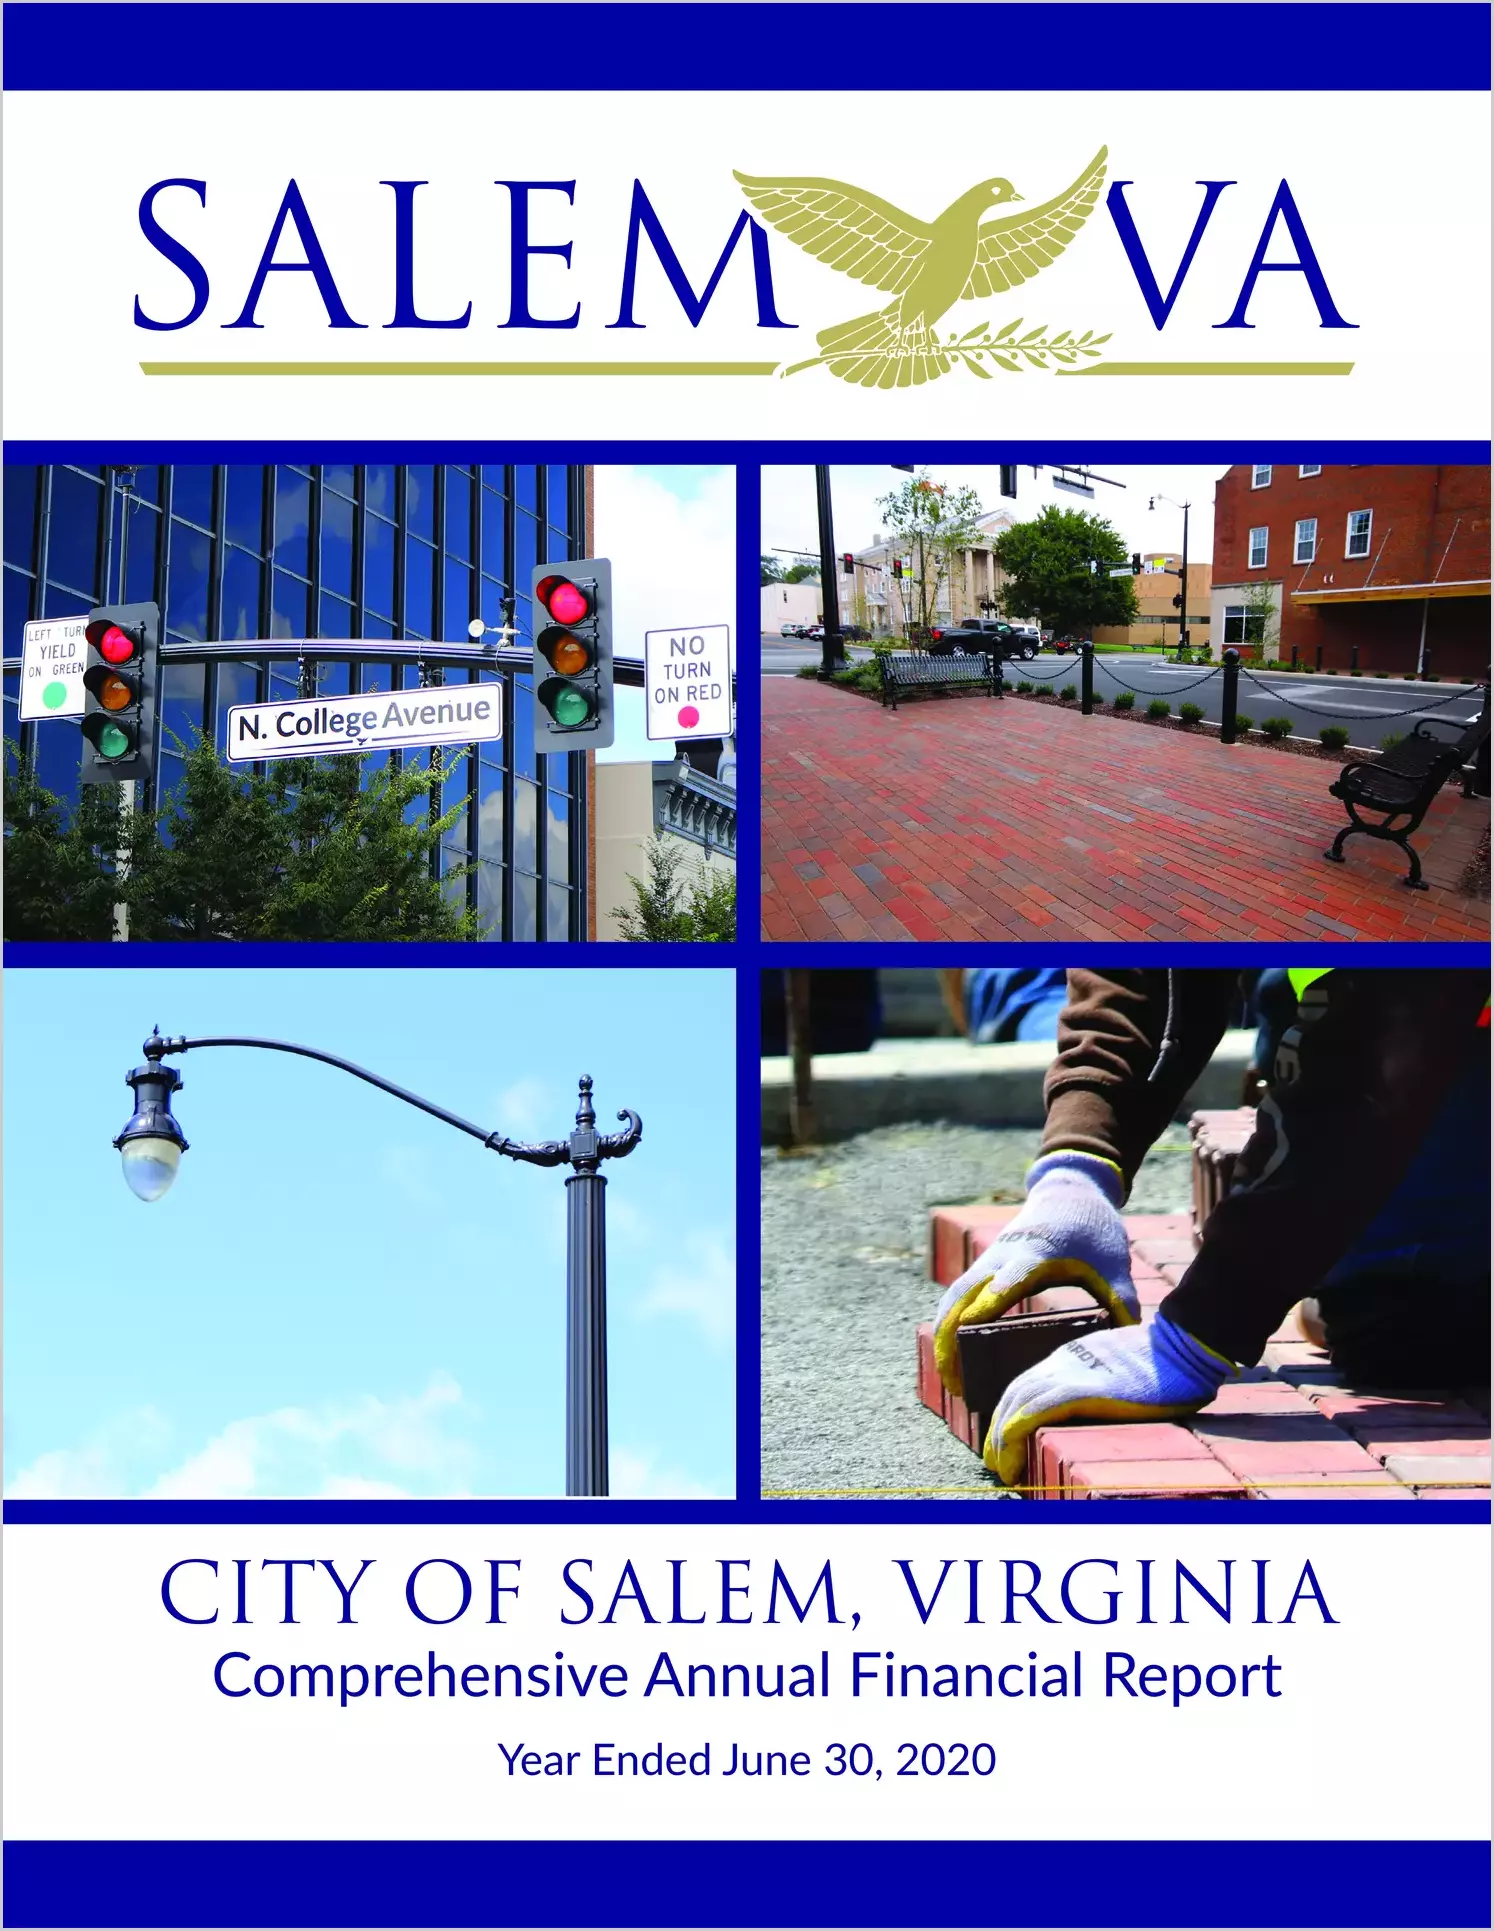 2020 Annual Financial Report for City of Salem